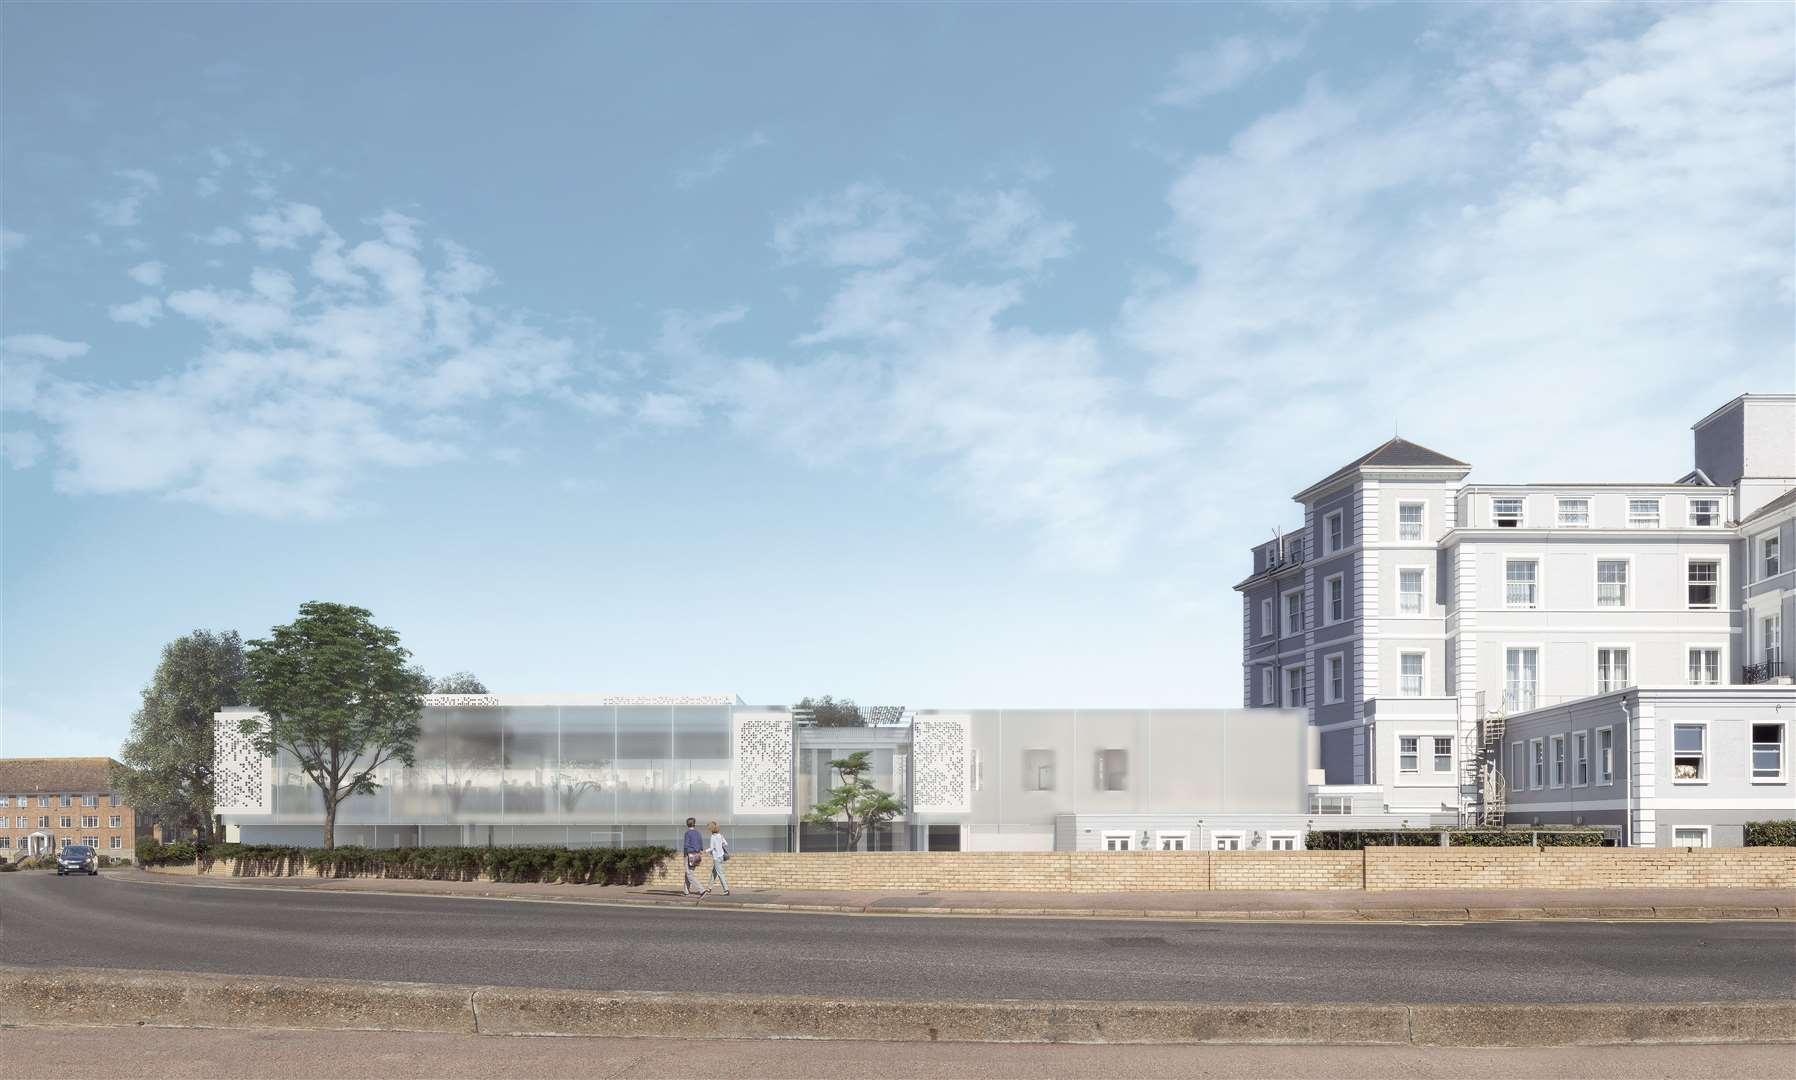 New spa and gym facilities are planned for the seafront hotel